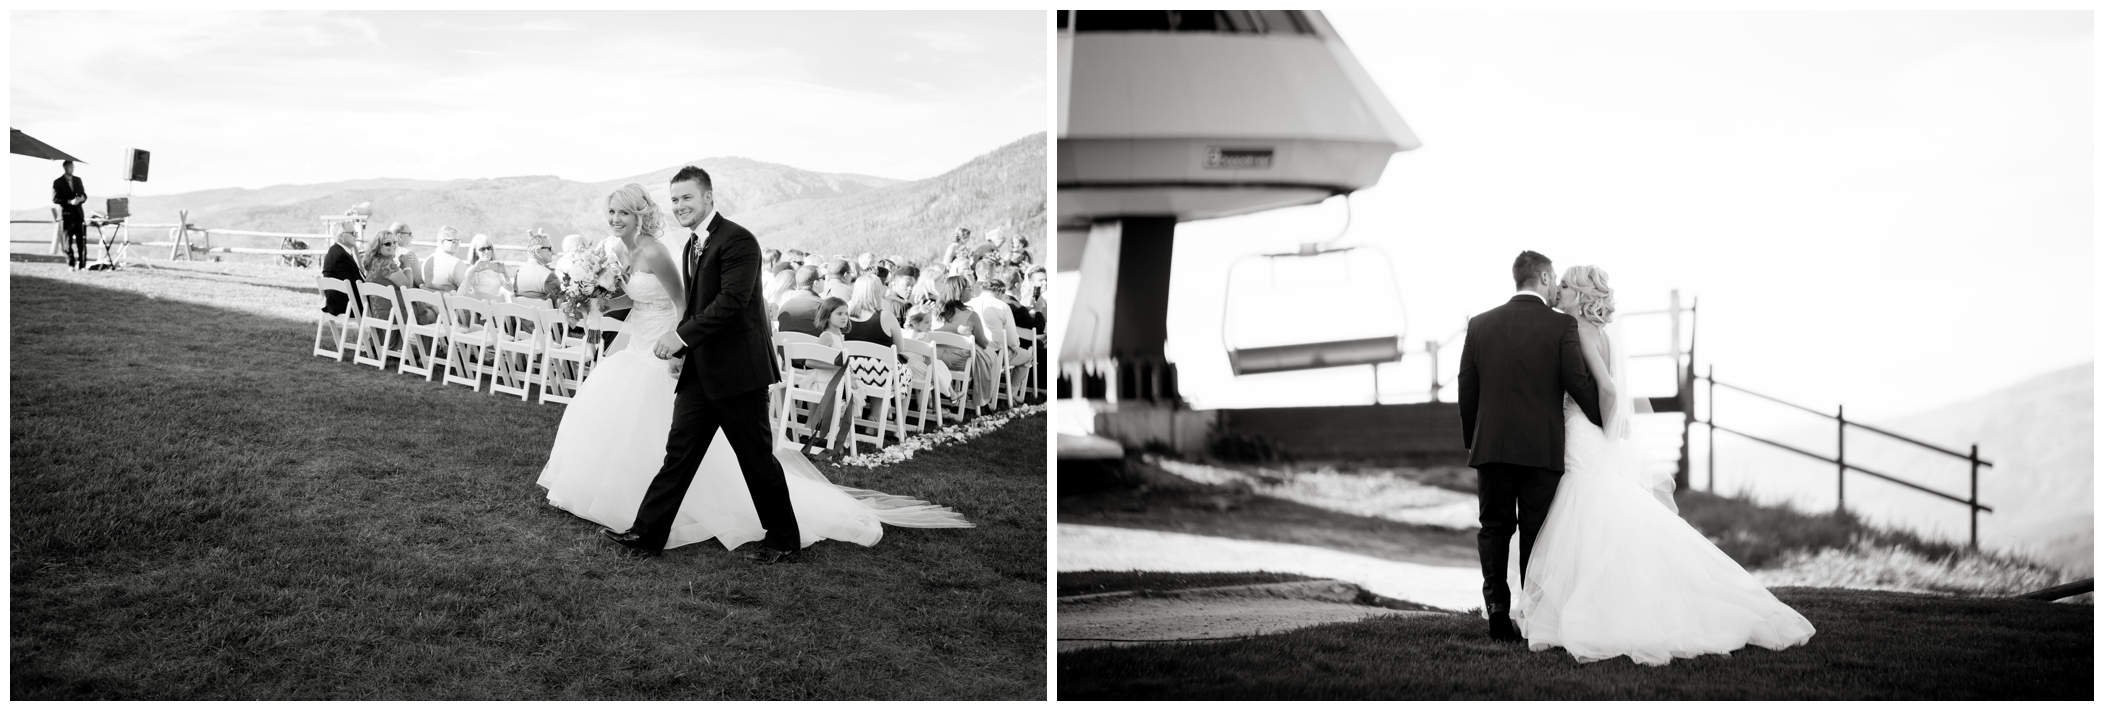 wedding recessional at thunderhead lawn steamboat 